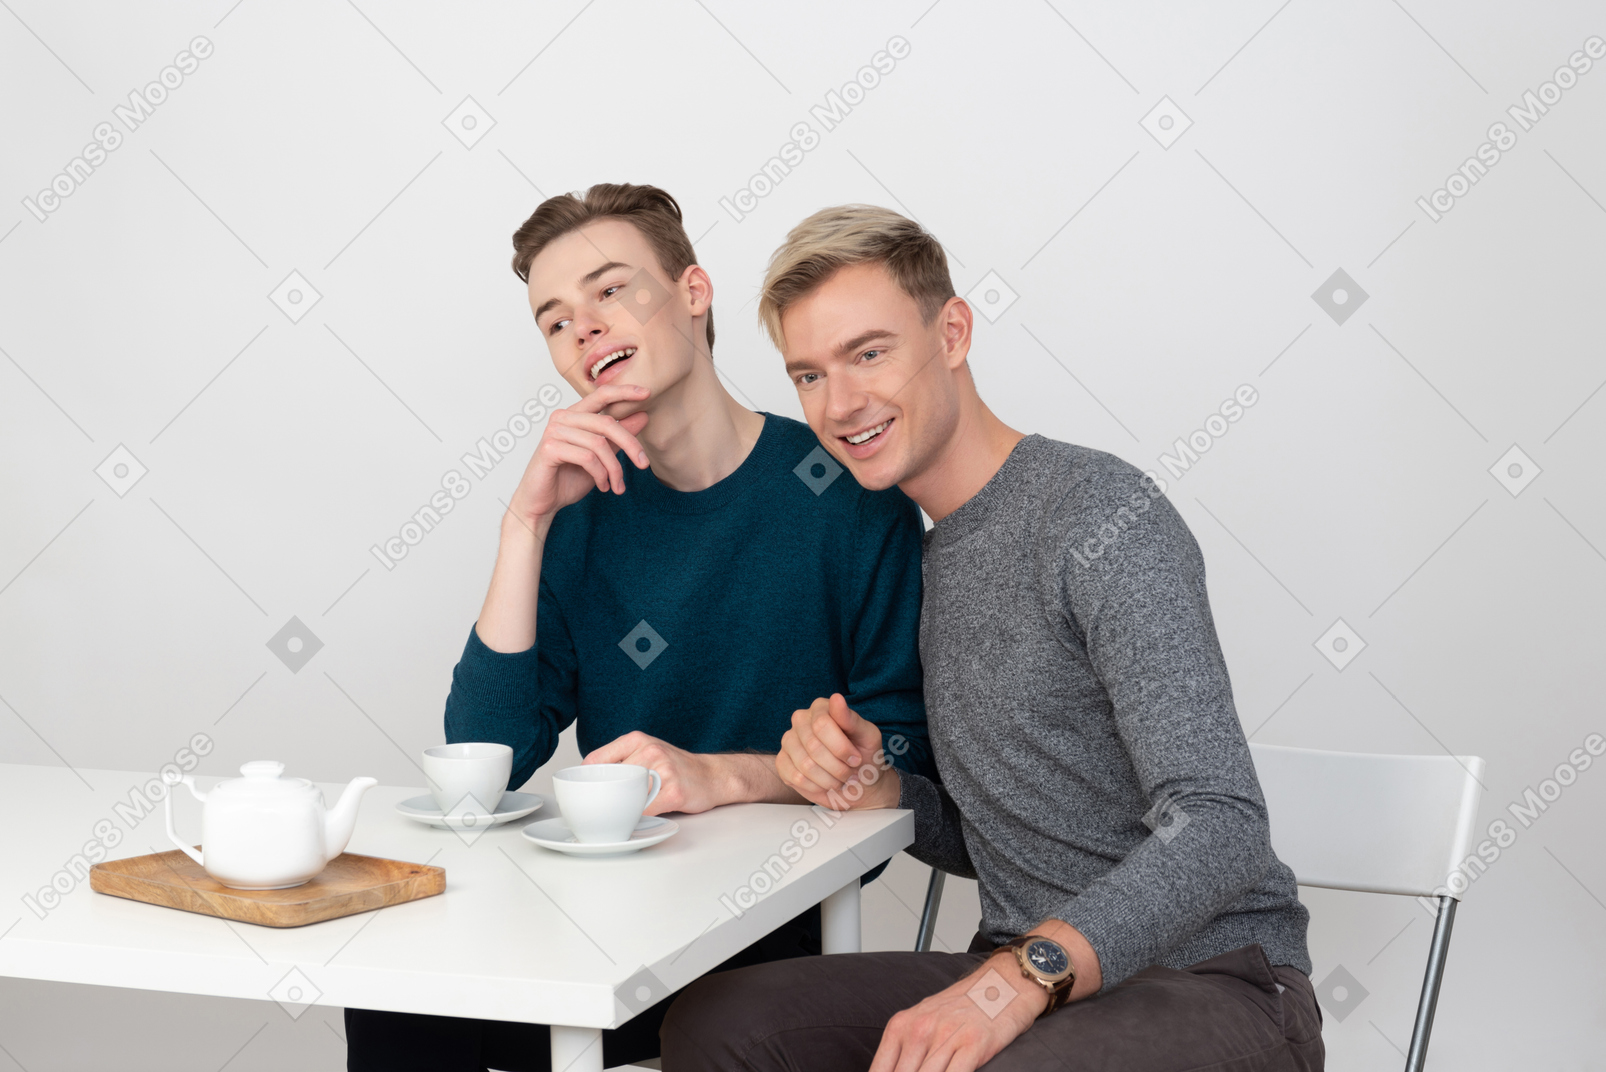 Two handsome young men on a romantic date